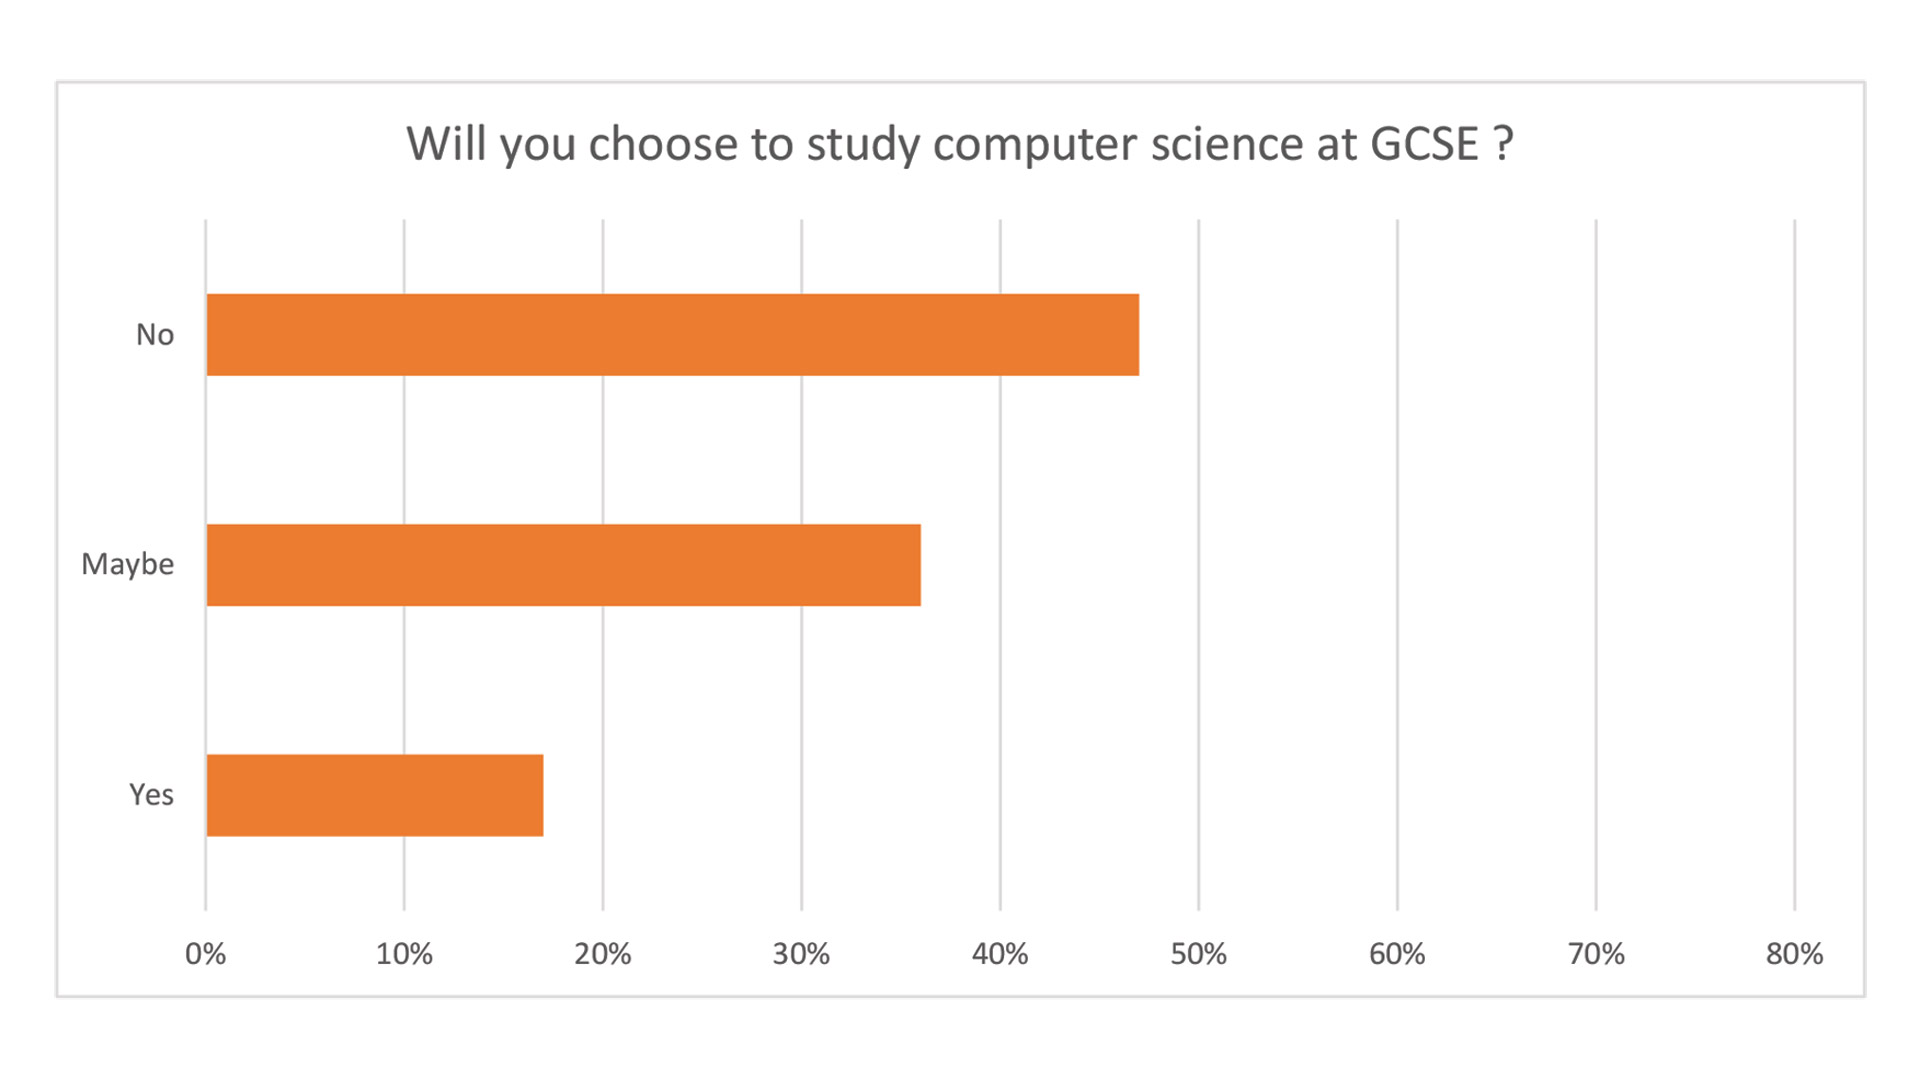 Graph 3 - Will you choose to student computer science at GCSE